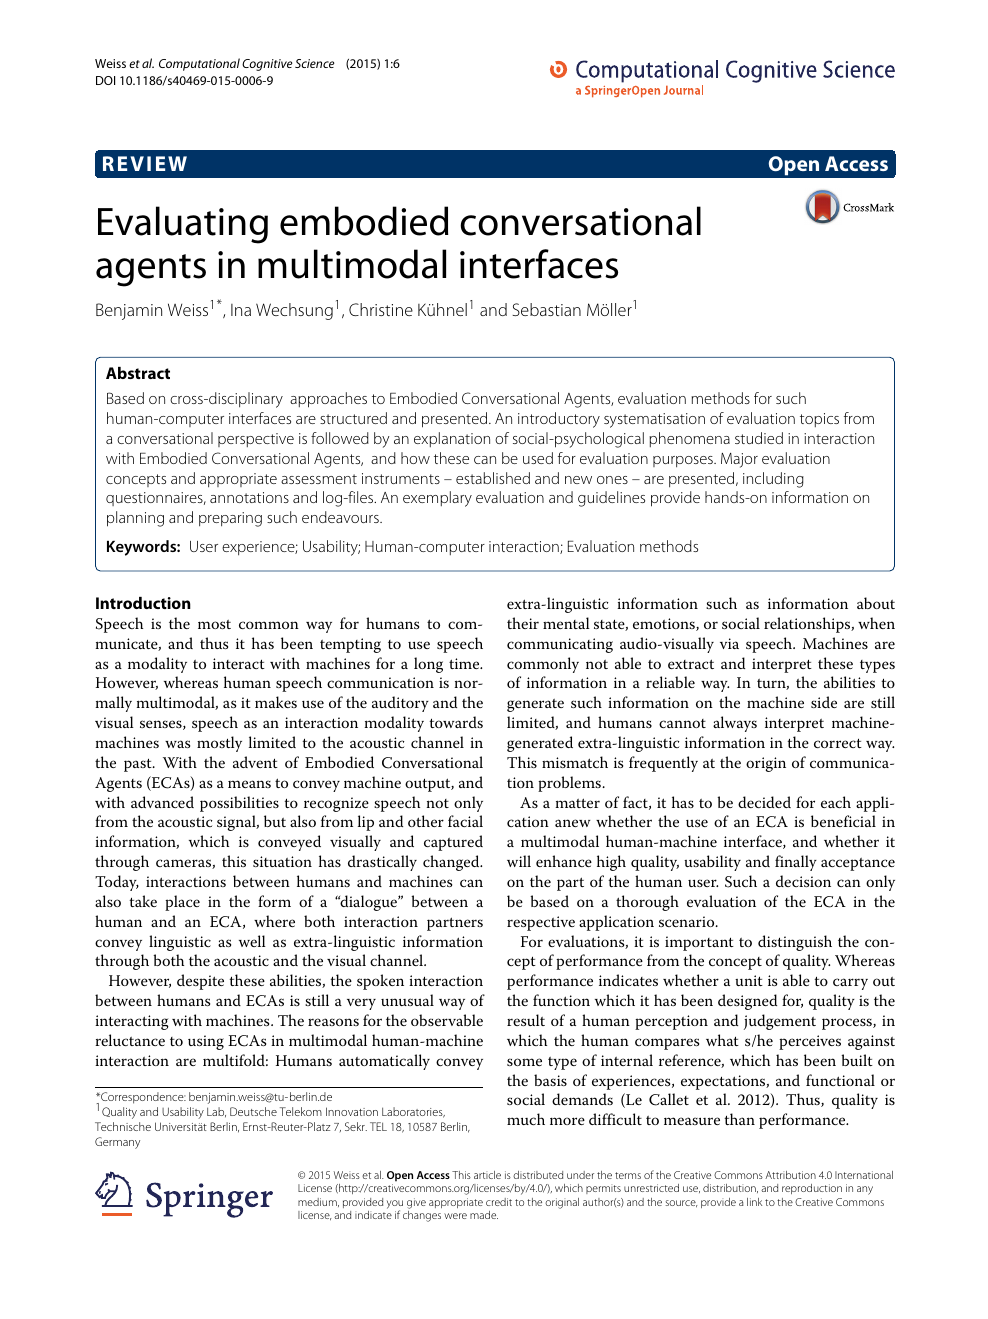 Evaluating Embodied Conversational Agents In Multimodal - 